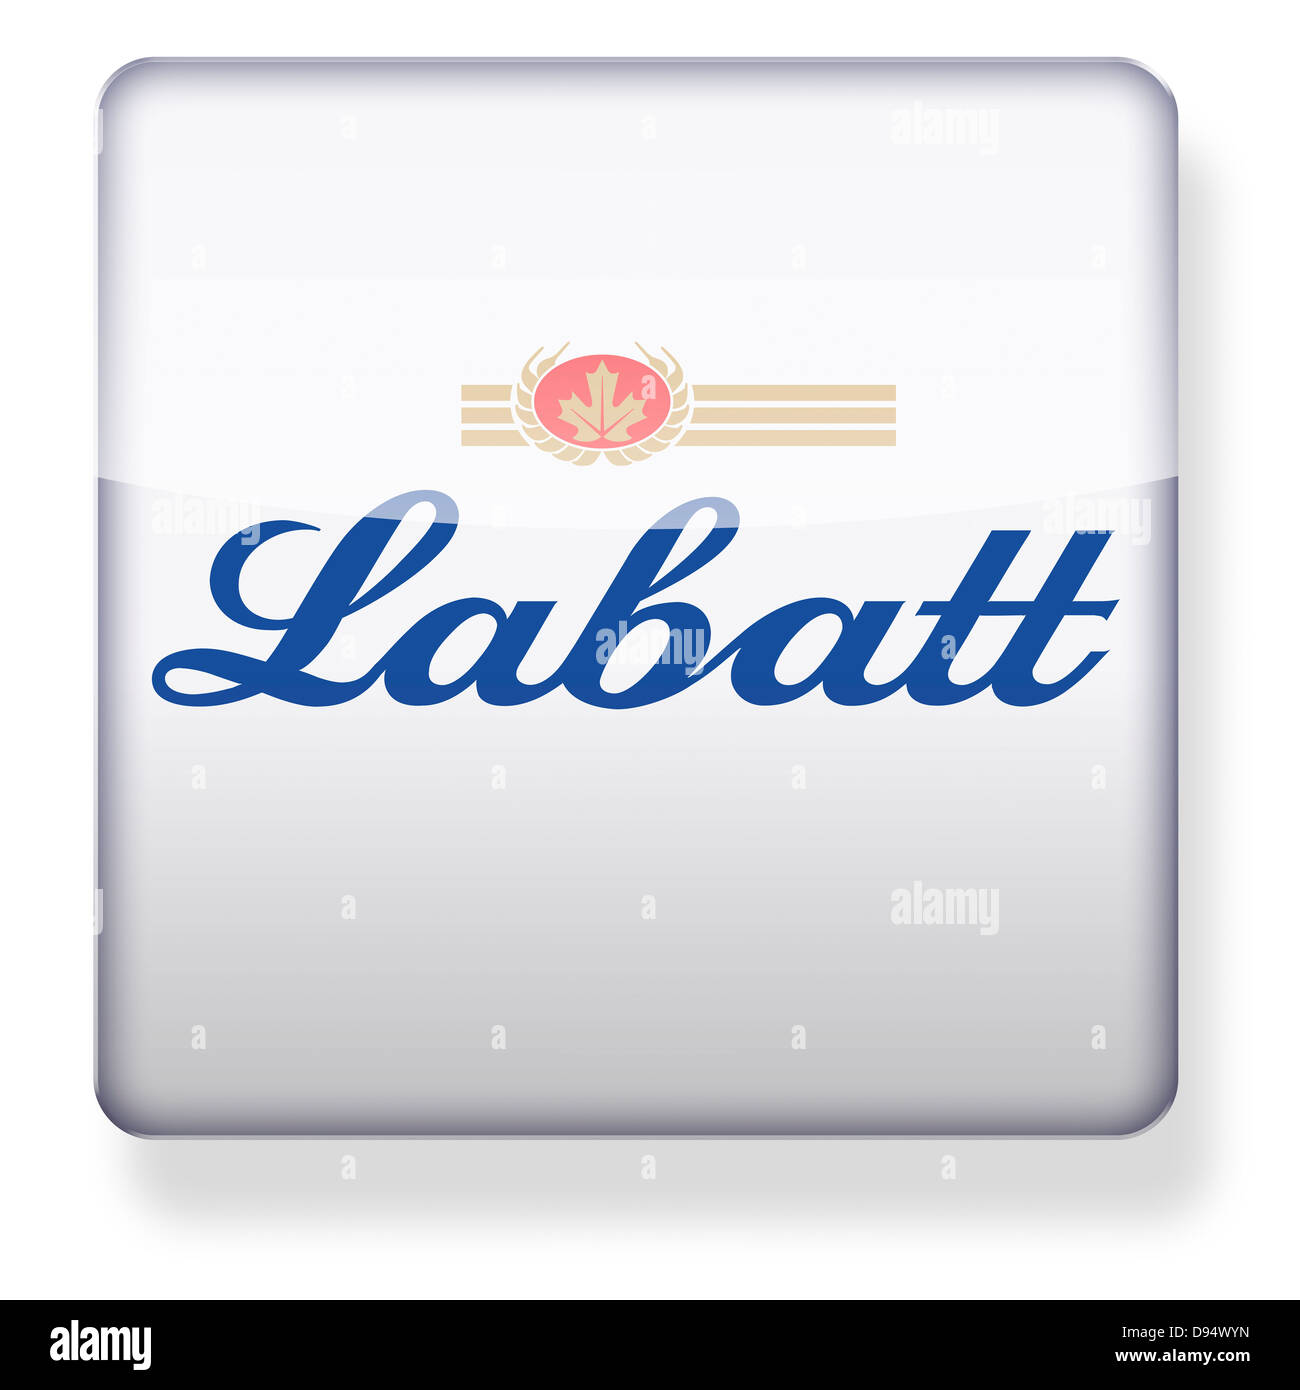 Labatt brewery logo as an app icon. Clipping path included. Stock Photo